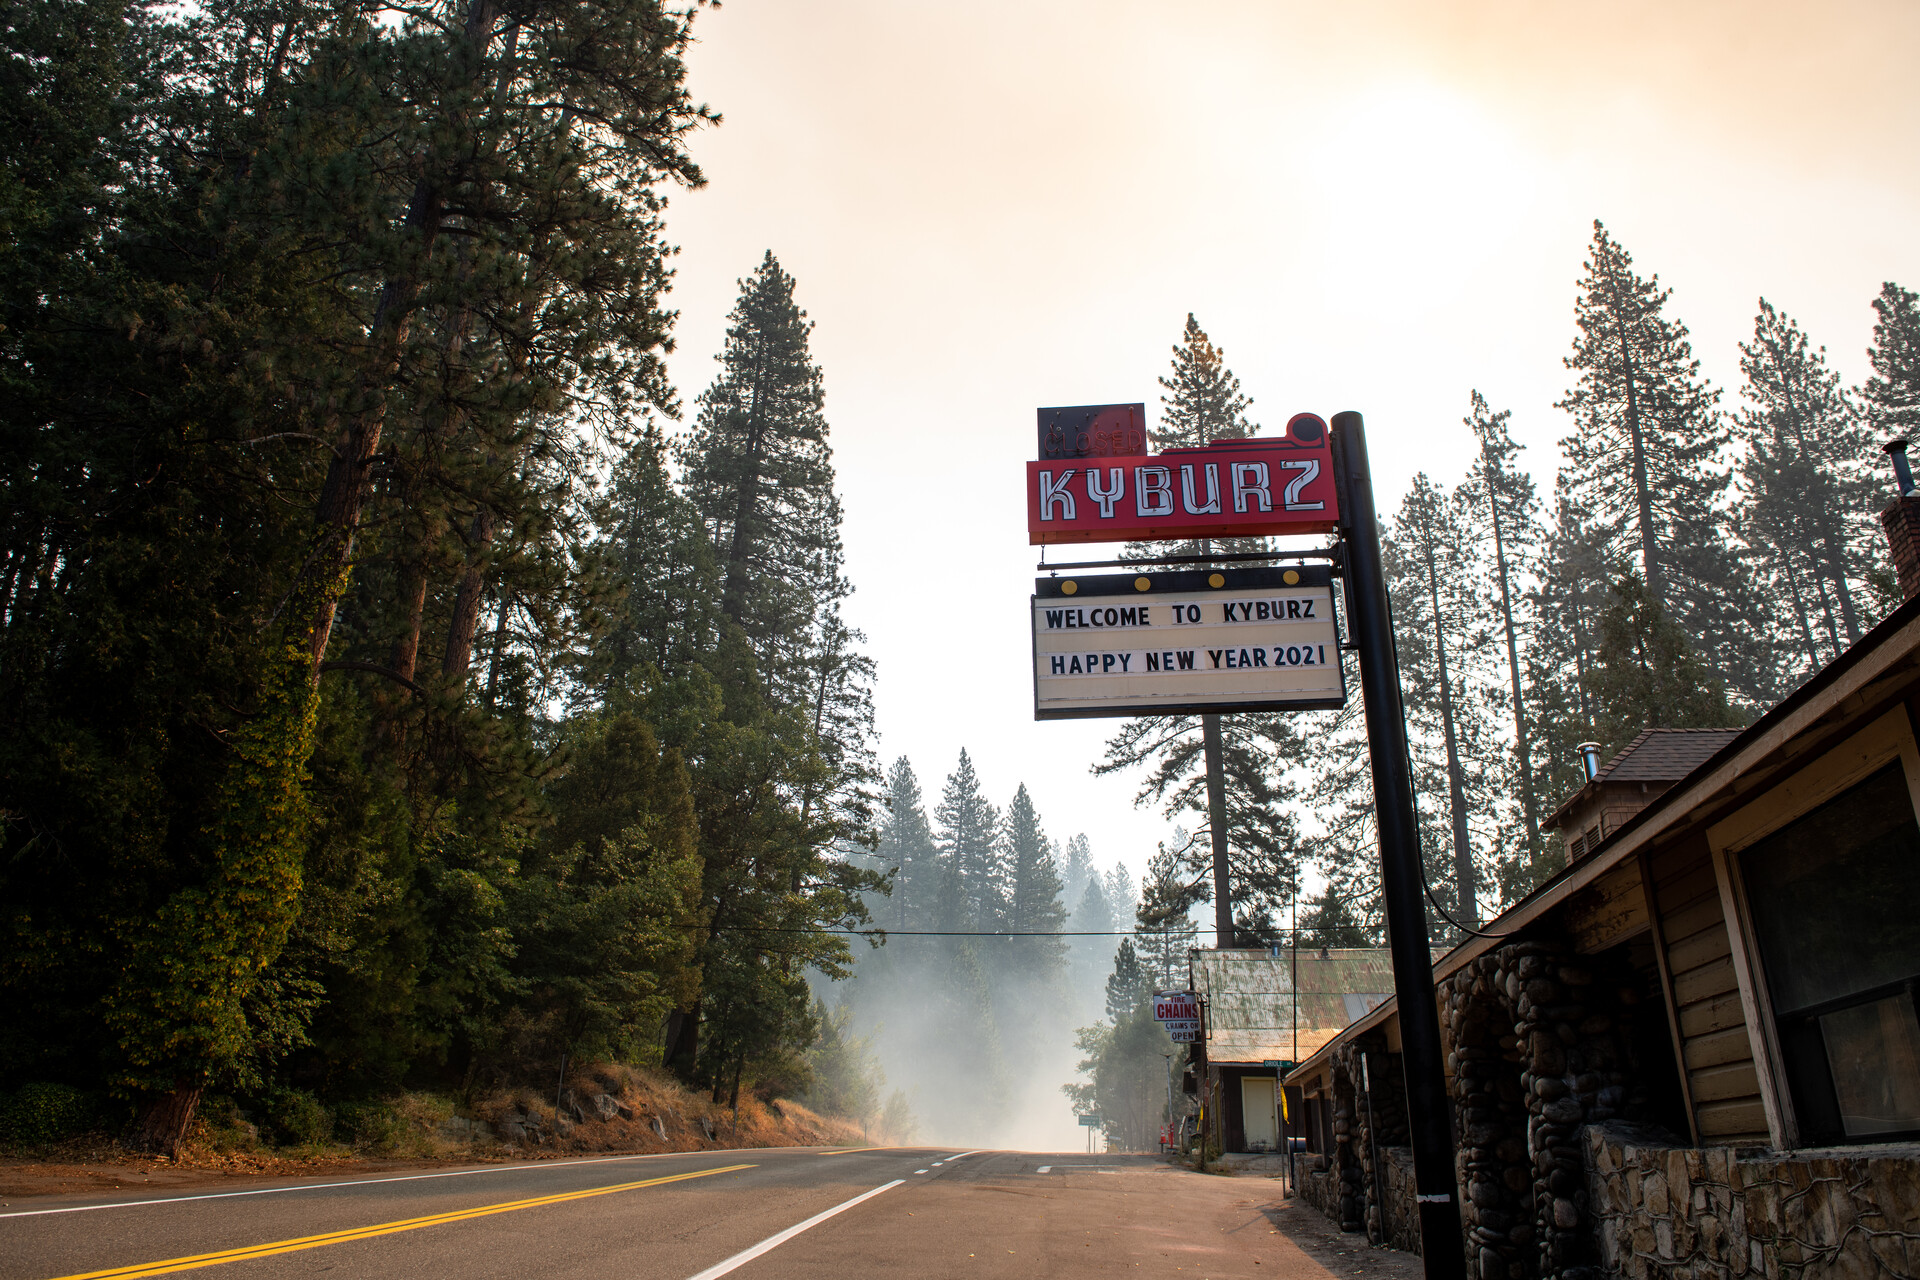 A red and white sign on a tall pole along a two-lane road, surrounded by tall fir trees, with smoke haze in the distance.